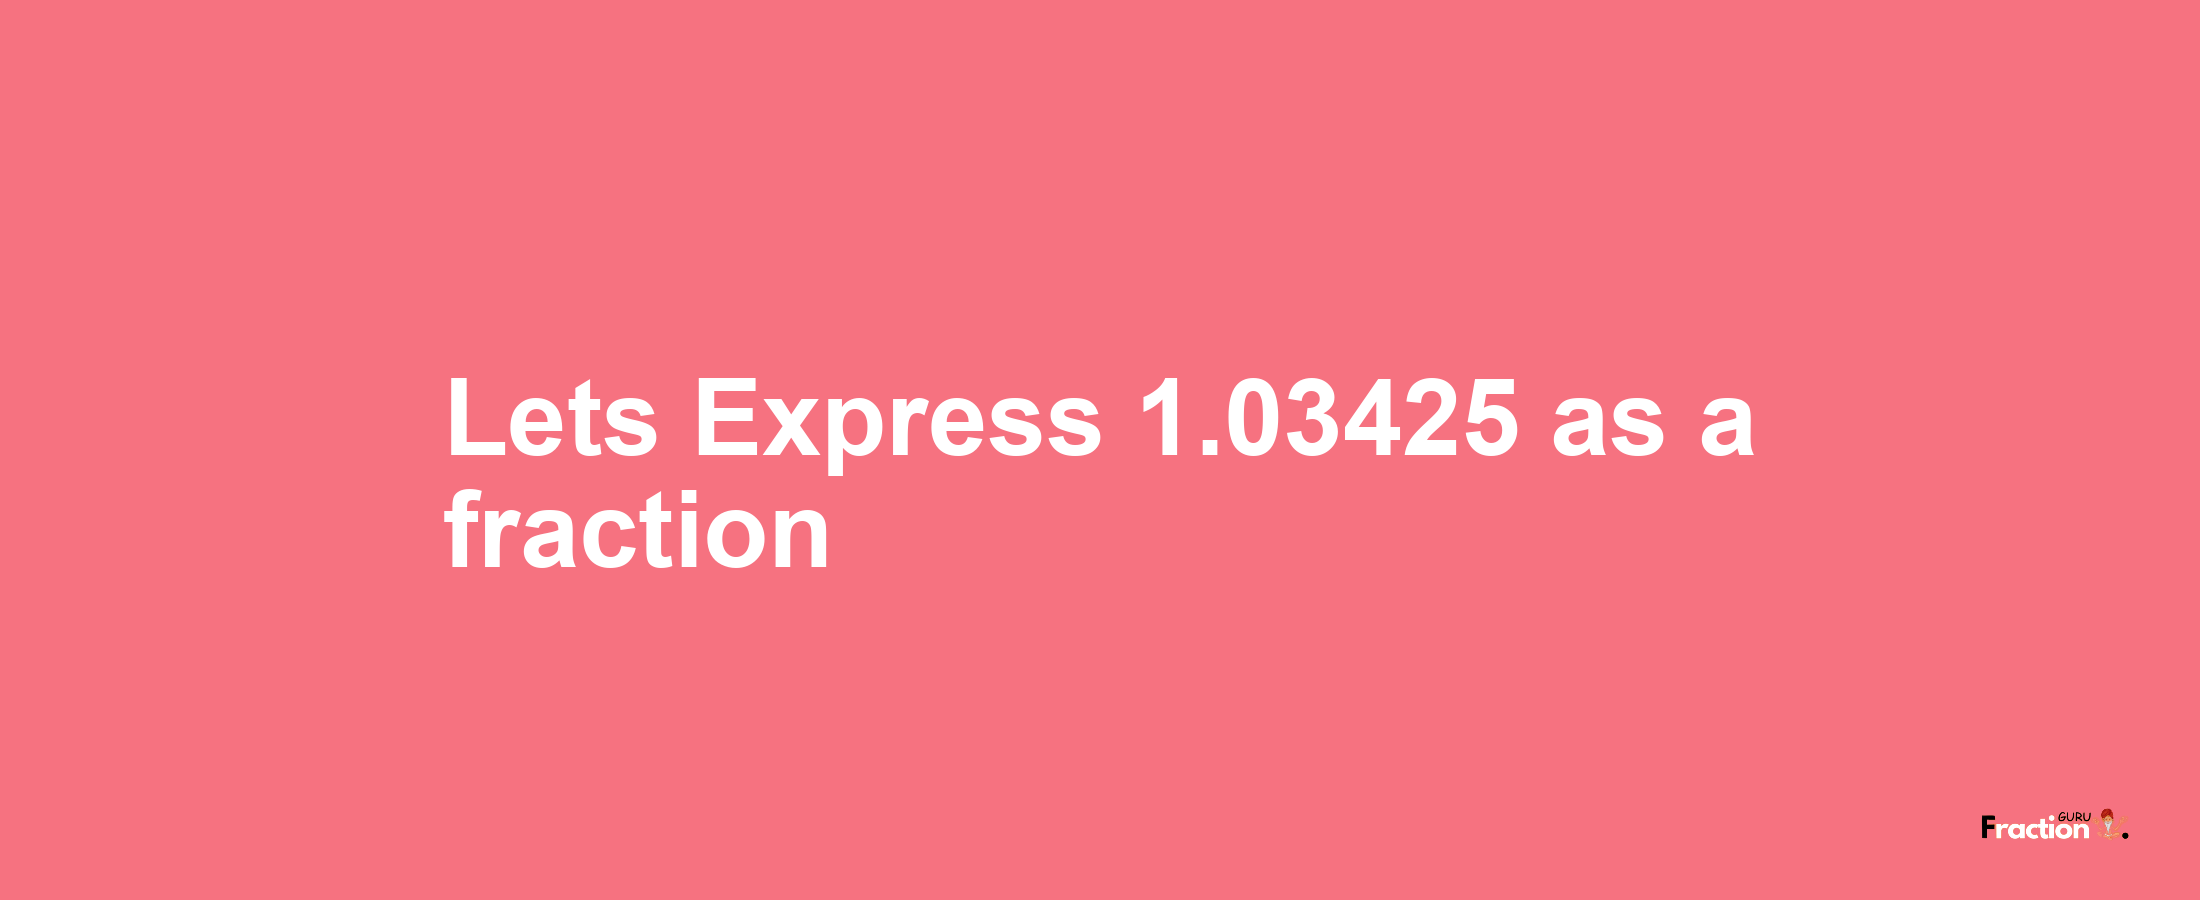 Lets Express 1.03425 as afraction